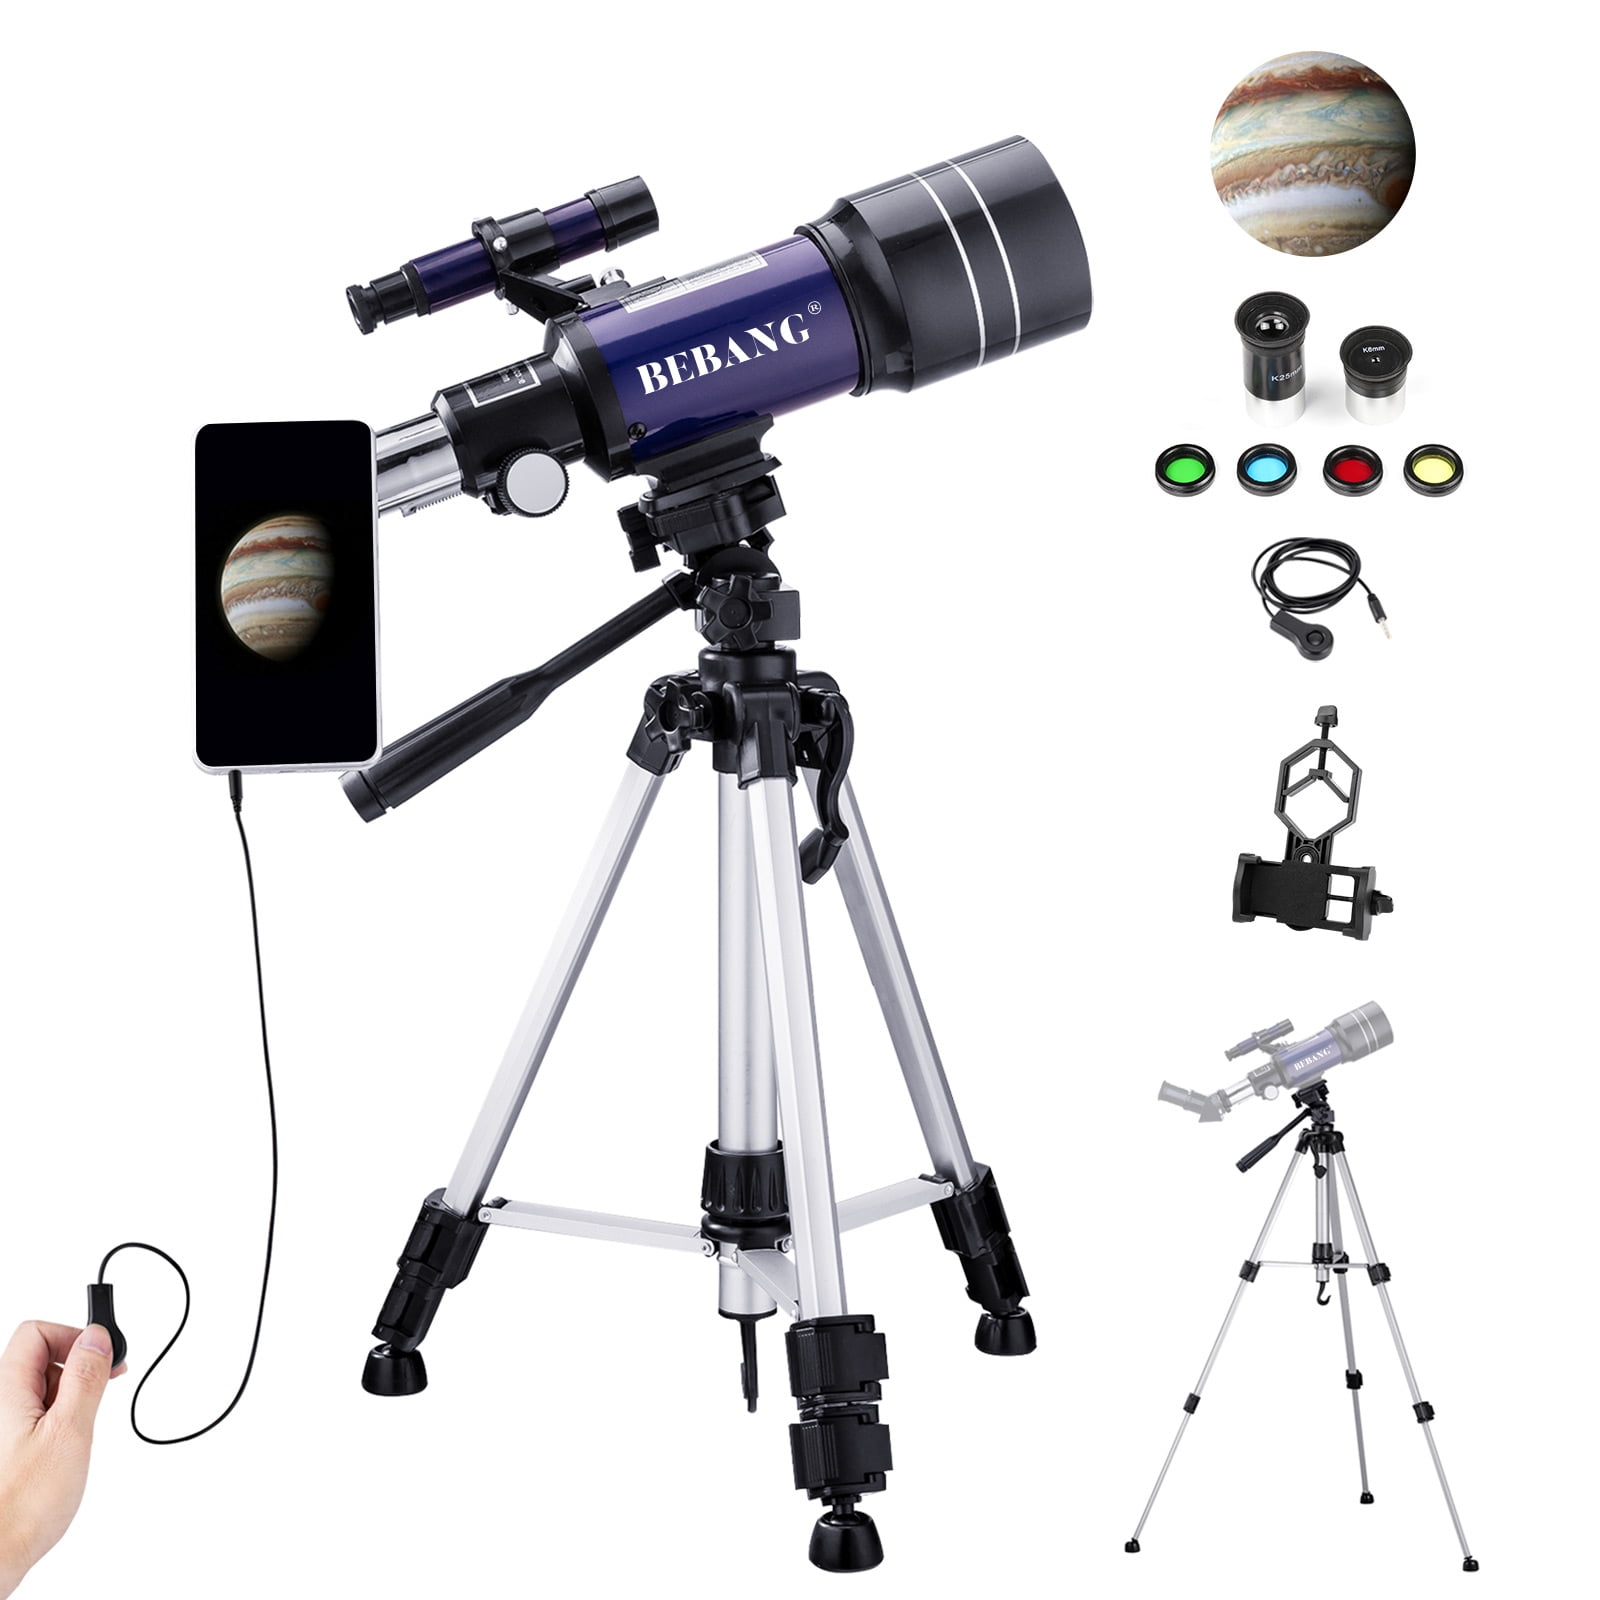 Professional Astronomy Telescope 400MM & 80MM for Kids Adults Beginners with Tripod & Smartphone Adapter 